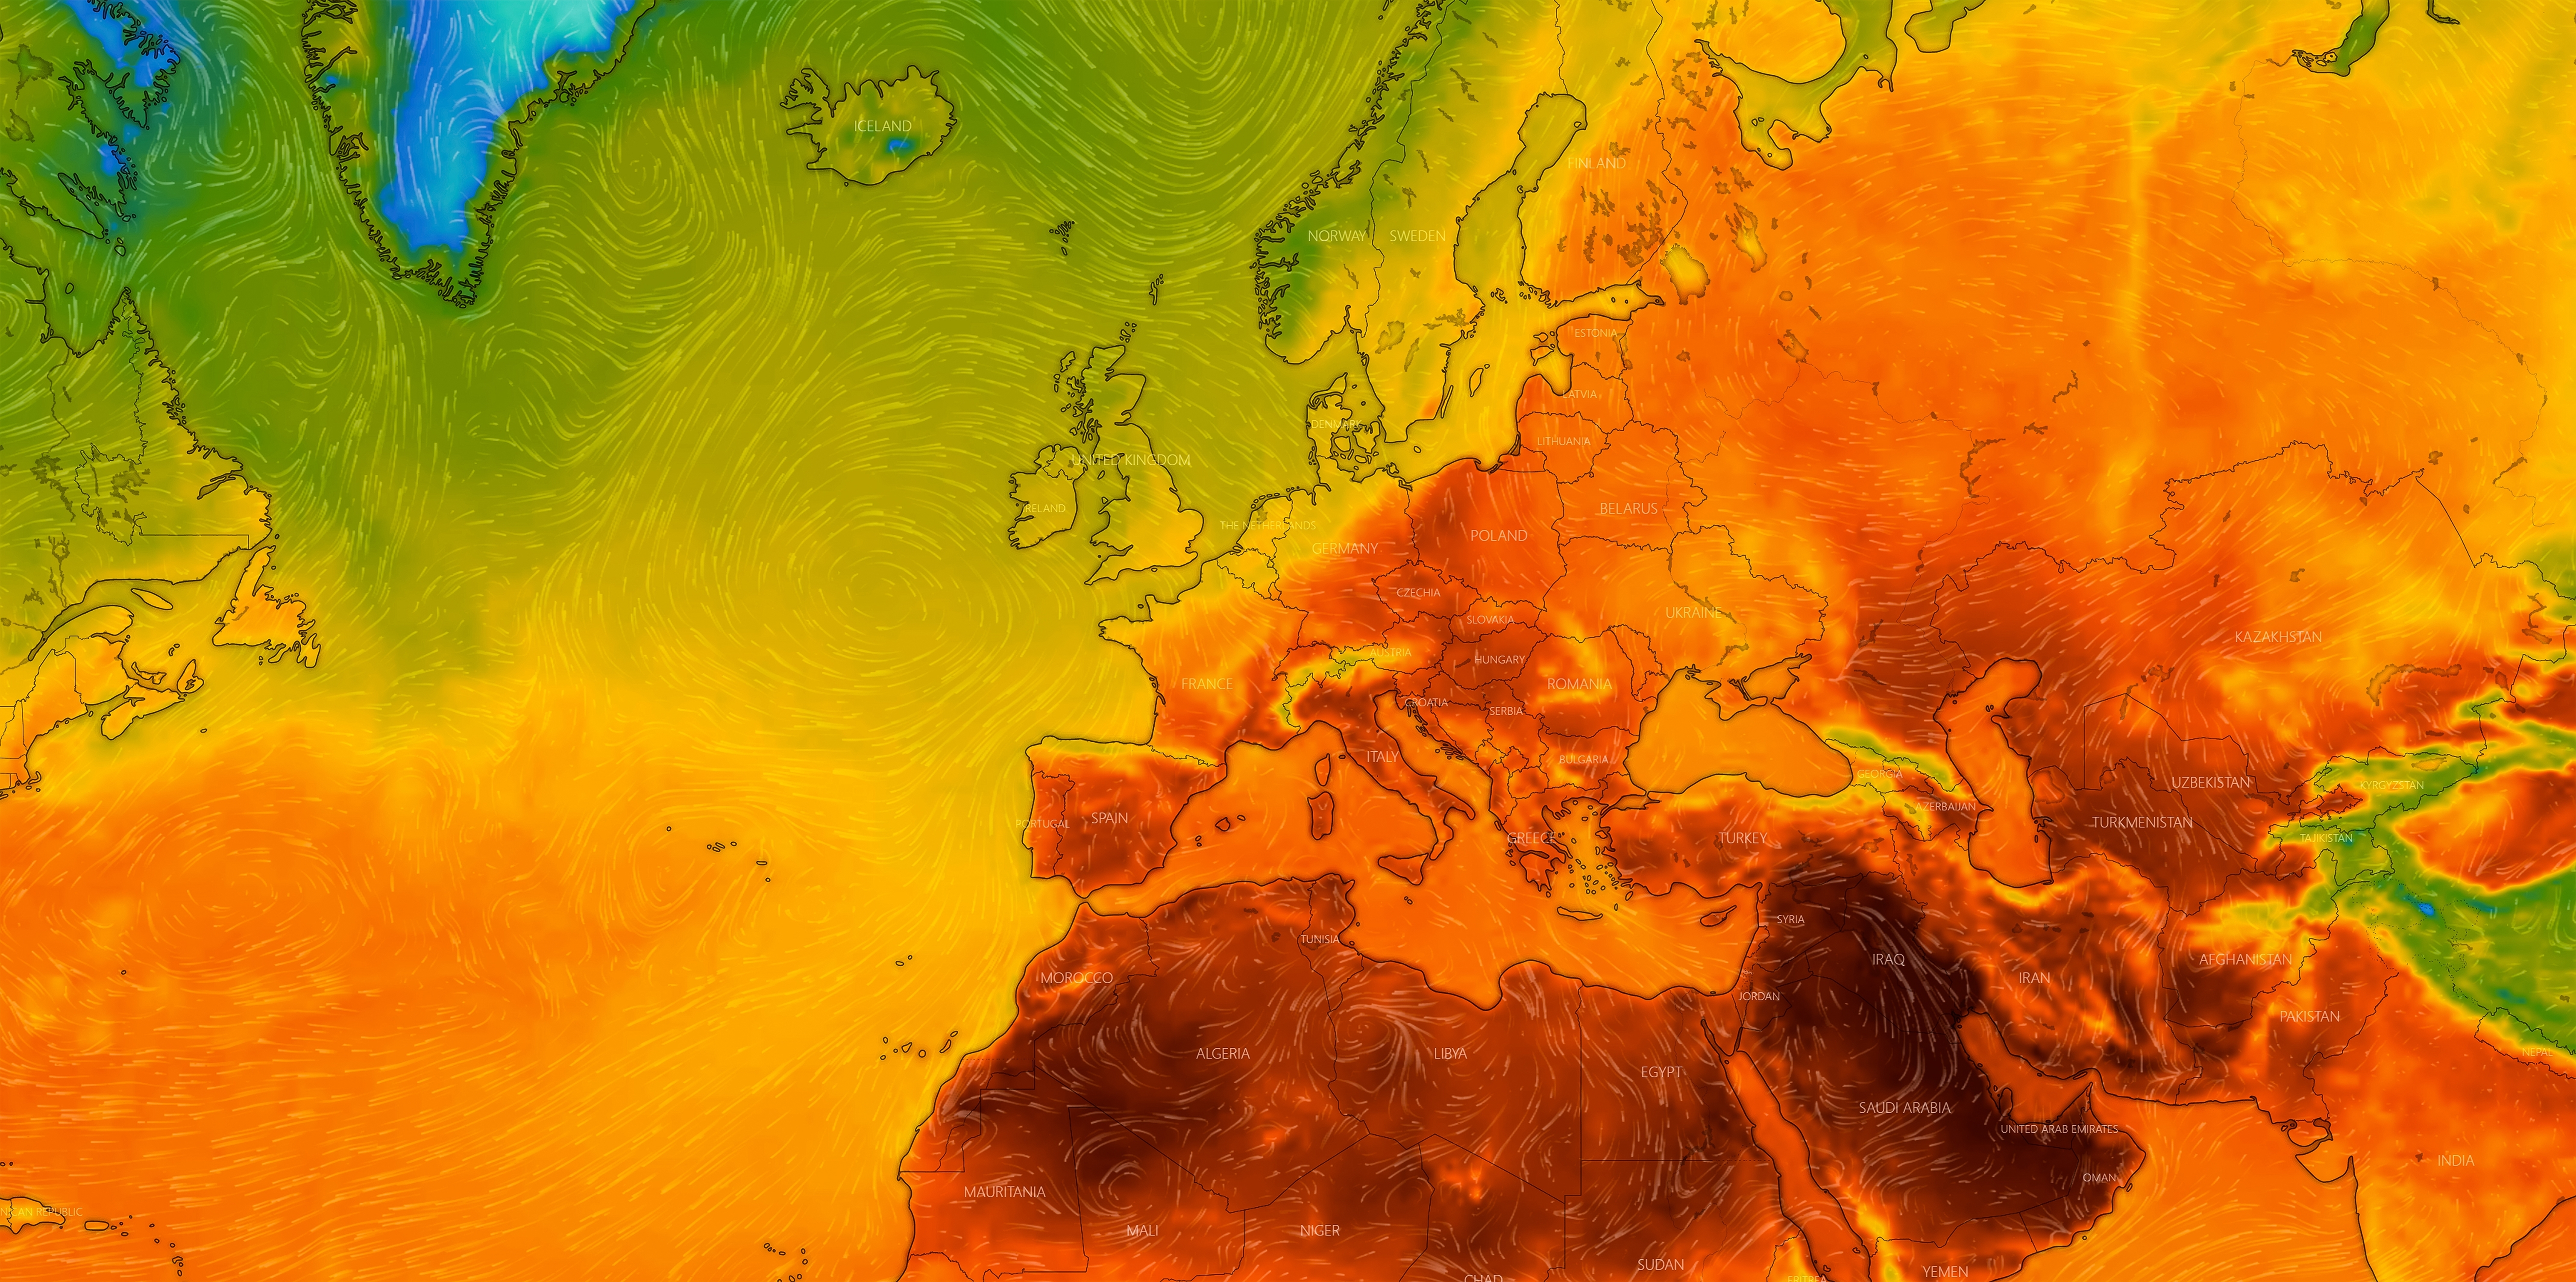 Image shows map of europe with heatwave